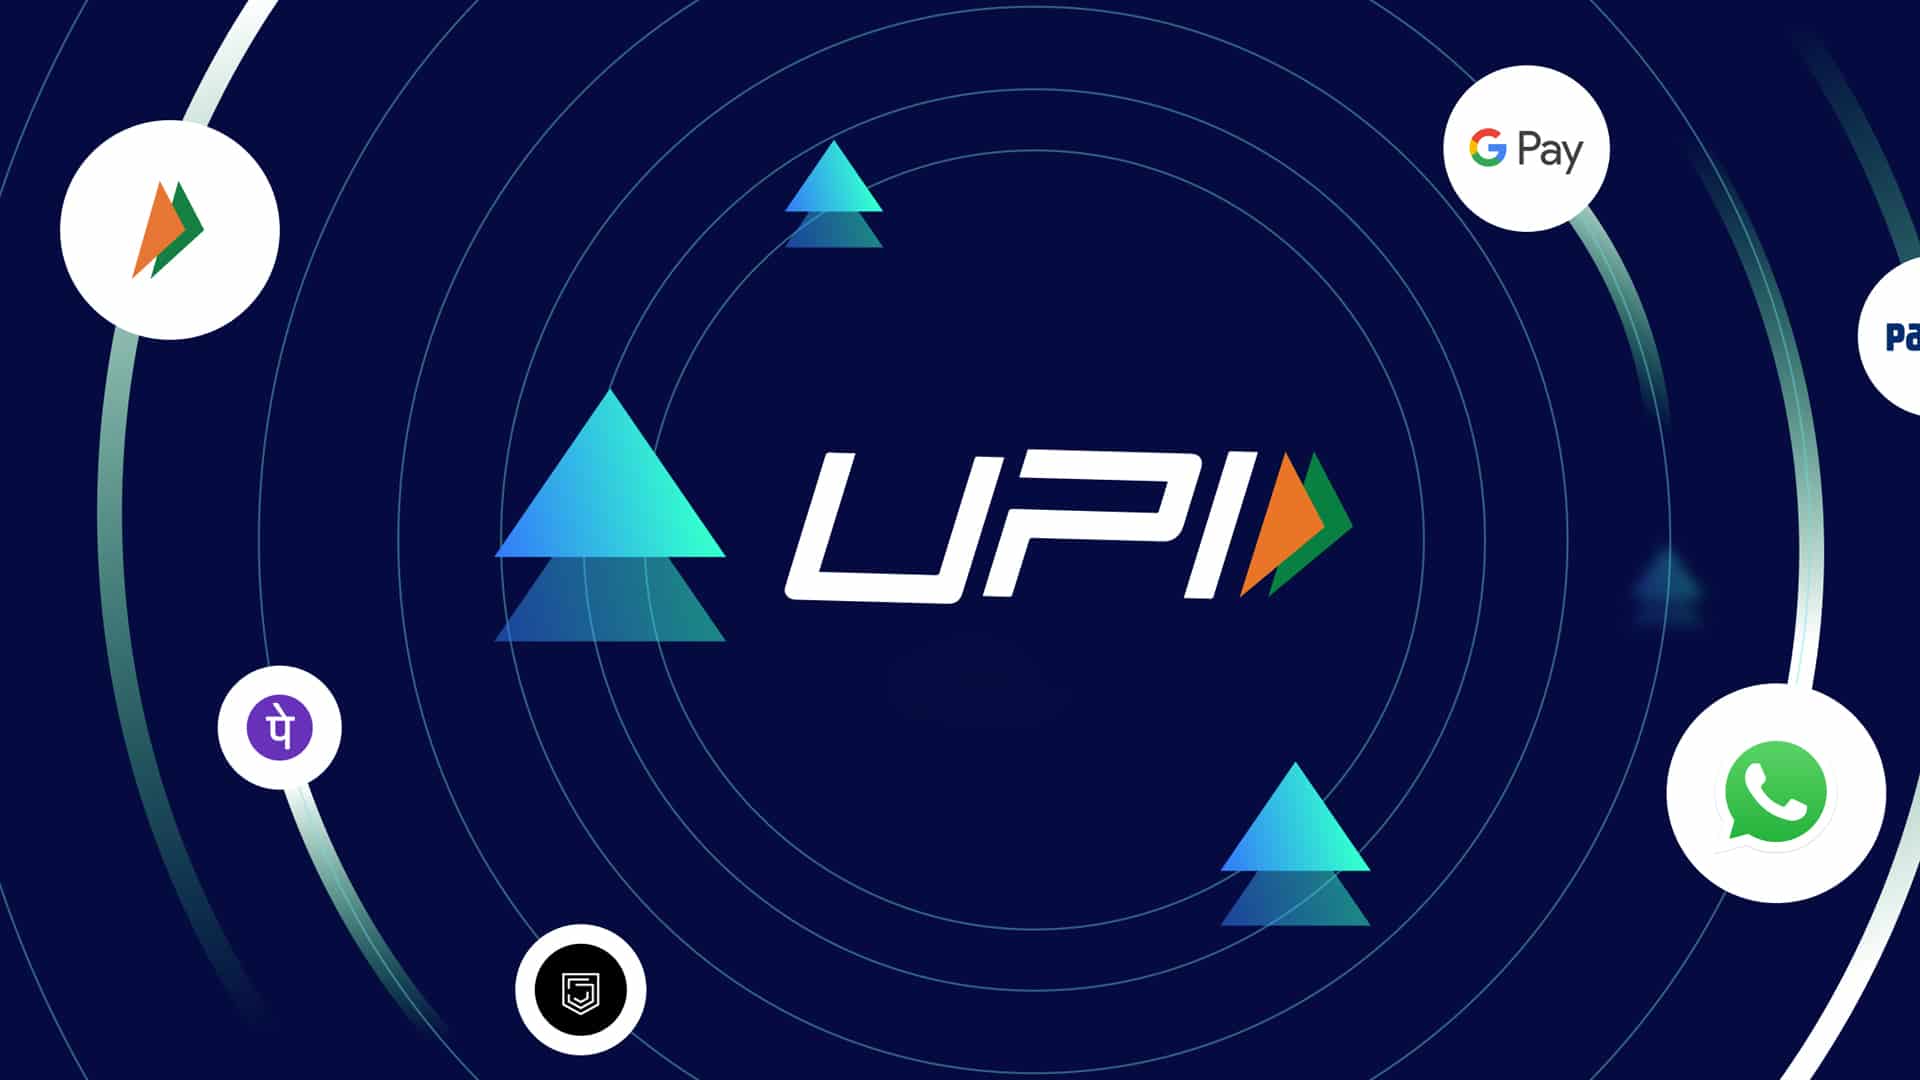 RBI raises per transaction limit for UPI Lite to Rs 500 from Rs 200 to promote digital transaction